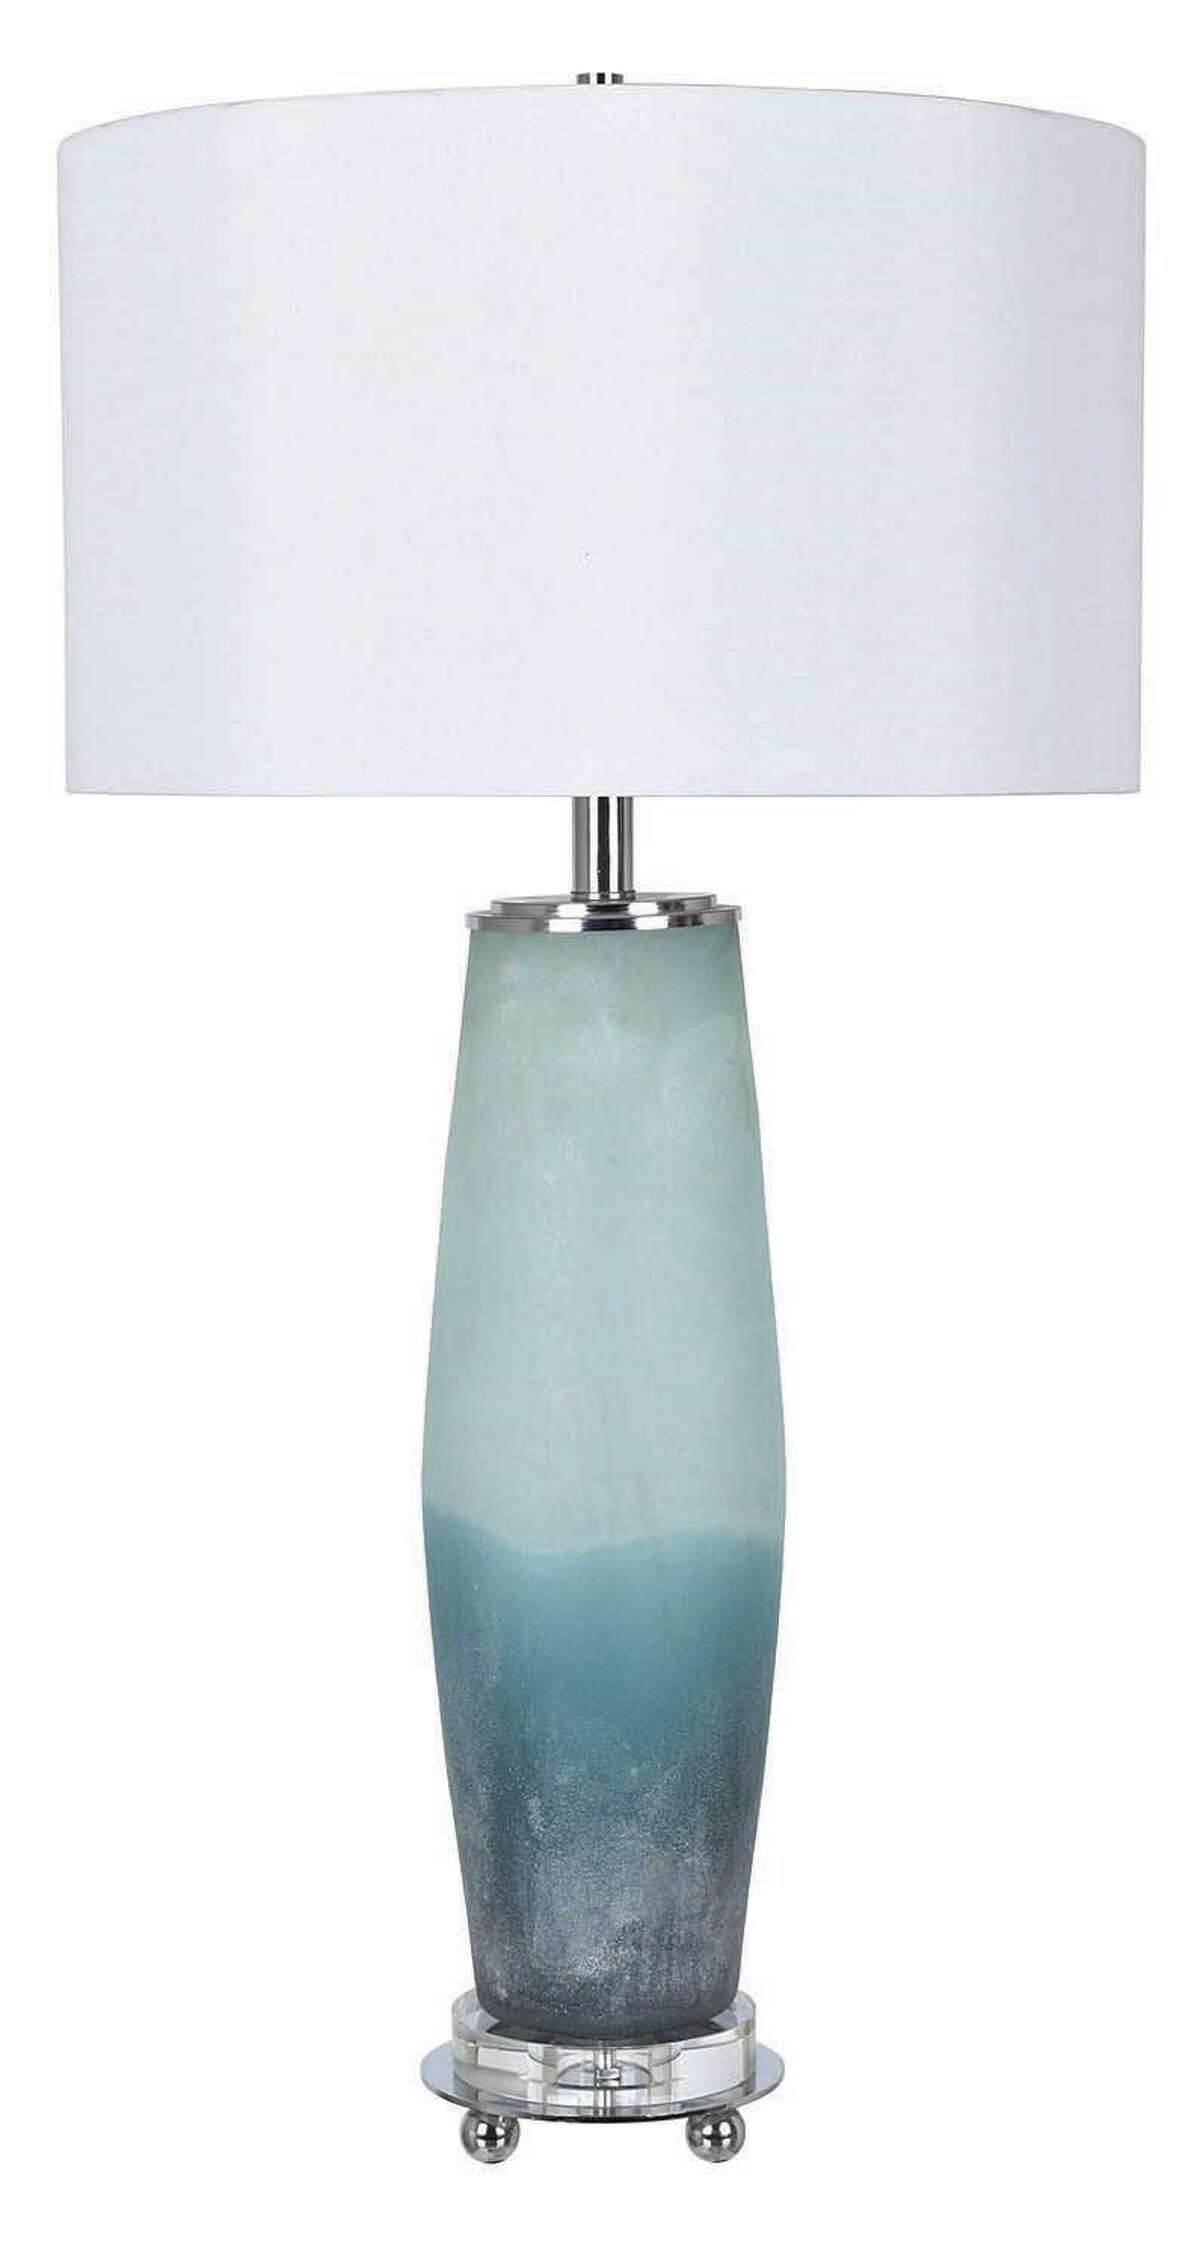 Sea breezes  Seaside table lamp  Highlighted by frosted aquamarines and blues with a sea-glass finish, the lamp has a glass body and sits on a crystal-clear acrylic cylinder. $272.50, Crestview Collection. Mellow Monkey Gifts and Home Decor, Stratford, mellowmonkey.com